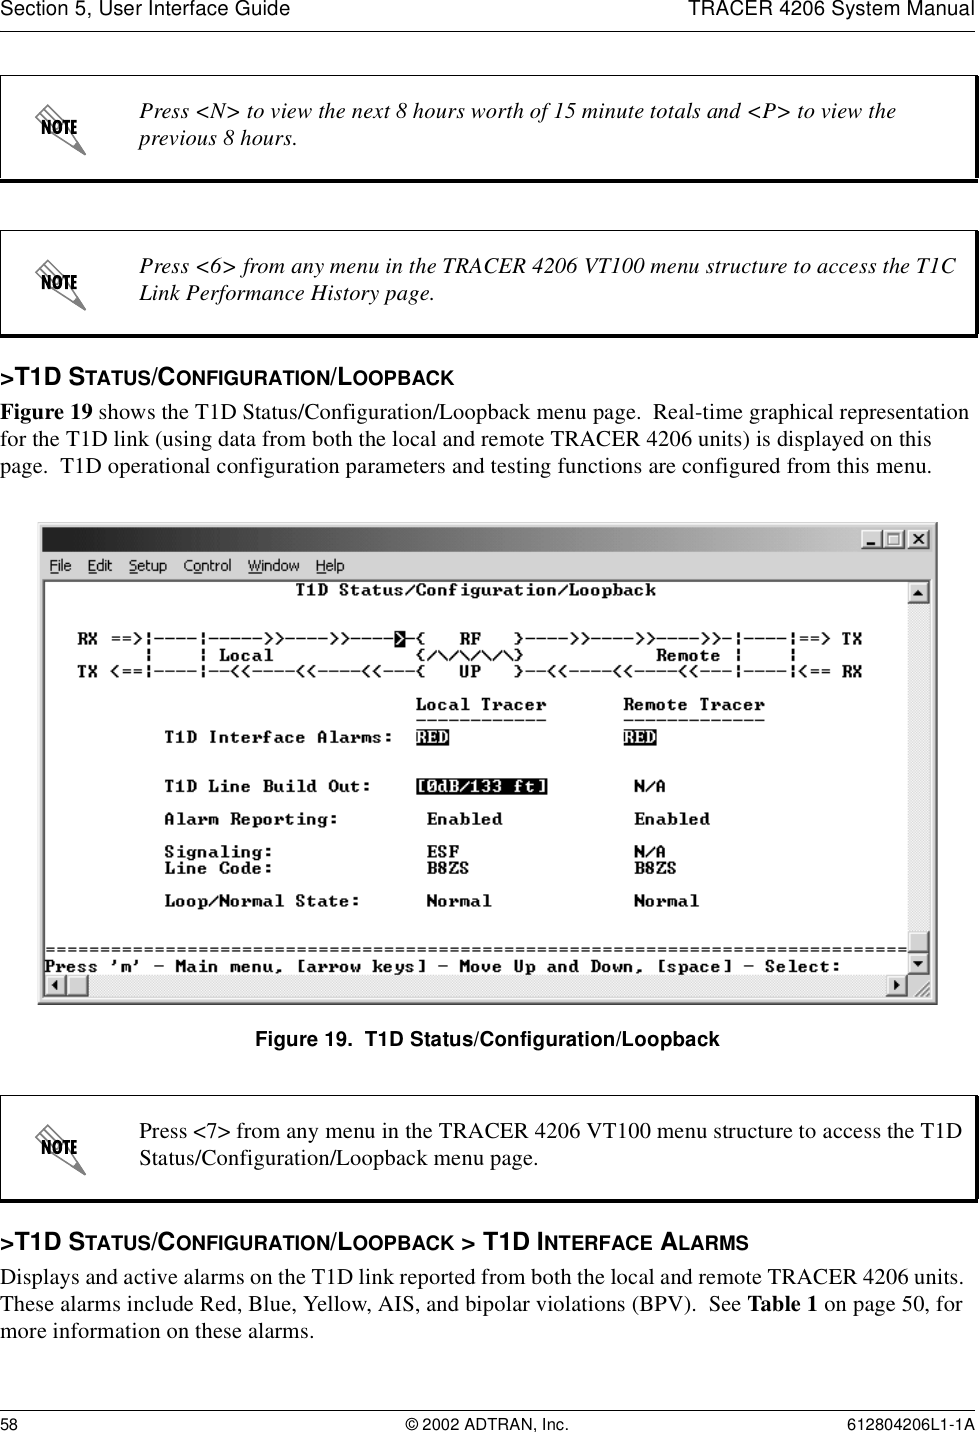 Section 5, User Interface Guide TRACER 4206 System Manual58 © 2002 ADTRAN, Inc. 612804206L1-1A&gt;T1D STATUS/CONFIGURATION/LOOPBACKFigure 19 shows the T1D Status/Configuration/Loopback menu page.  Real-time graphical representation for the T1D link (using data from both the local and remote TRACER 4206 units) is displayed on this page.  T1D operational configuration parameters and testing functions are configured from this menu.Figure 19.  T1D Status/Configuration/Loopback&gt;T1D STATUS/CONFIGURATION/LOOPBACK &gt; T1D INTERFACE ALARMSDisplays and active alarms on the T1D link reported from both the local and remote TRACER 4206 units.  These alarms include Red, Blue, Yellow, AIS, and bipolar violations (BPV).  See Table 1 on page 50, for more information on these alarms.Press &lt;N&gt; to view the next 8 hours worth of 15 minute totals and &lt;P&gt; to view the previous 8 hours.Press &lt;6&gt; from any menu in the TRACER 4206 VT100 menu structure to access the T1C Link Performance History page.Press &lt;7&gt; from any menu in the TRACER 4206 VT100 menu structure to access the T1D Status/Configuration/Loopback menu page.